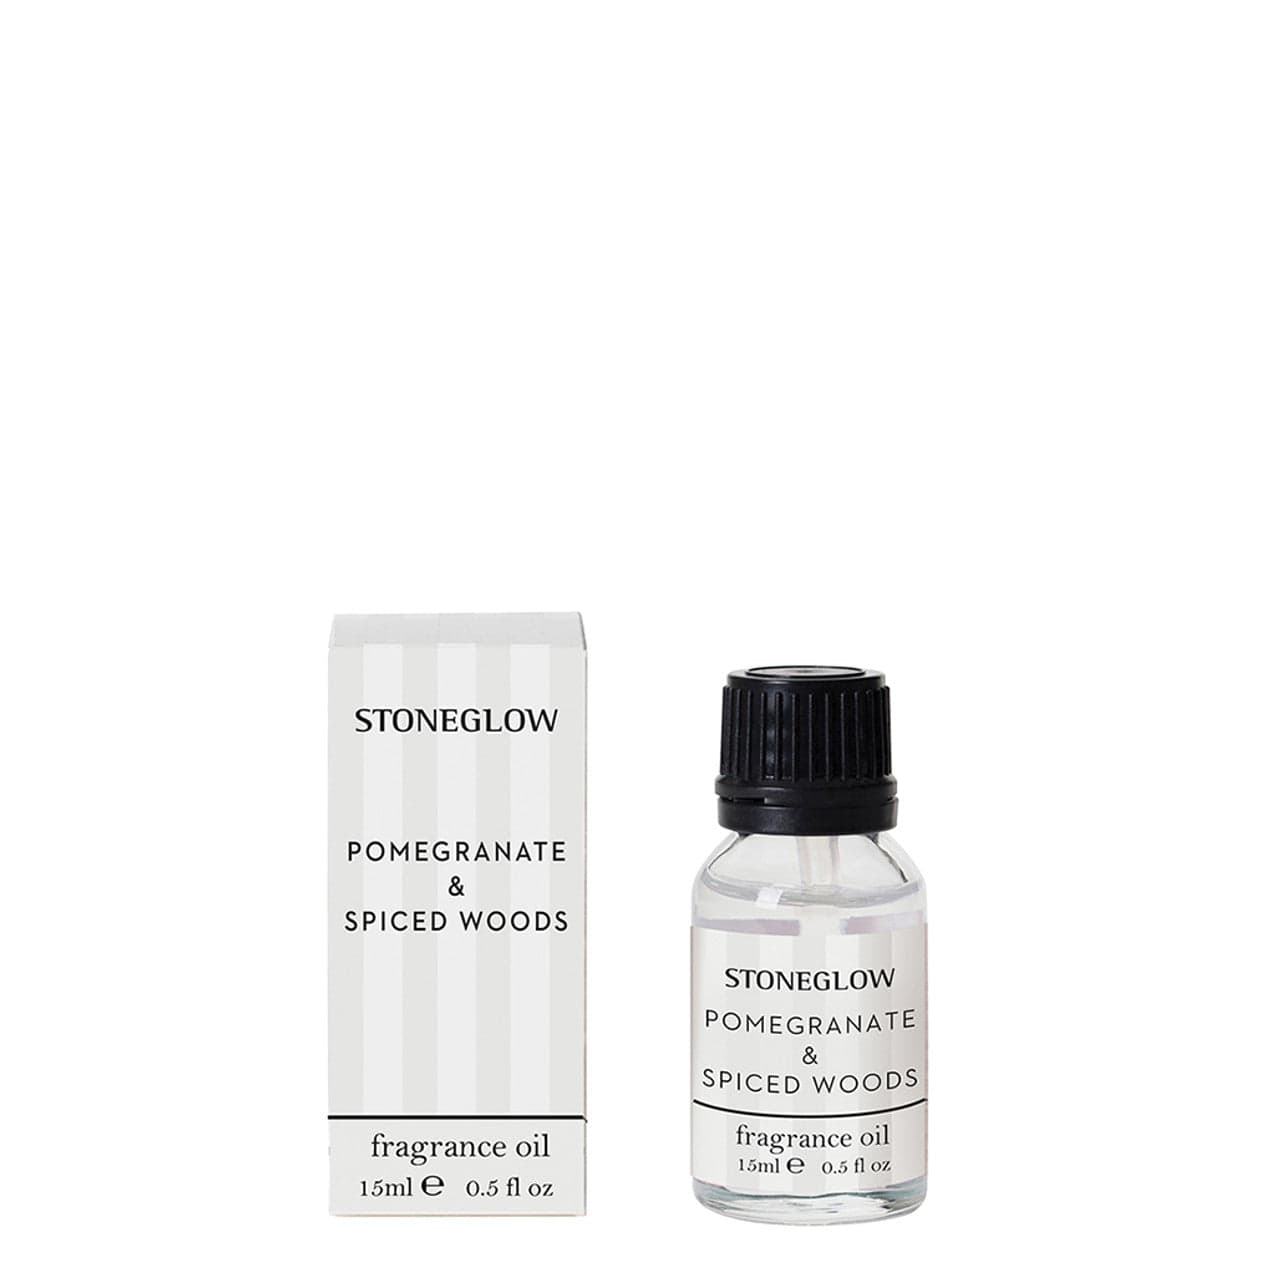 Stoneglow Modern Classics - Pomegranate & Spiced Woods - Fragrance Oil 15ml